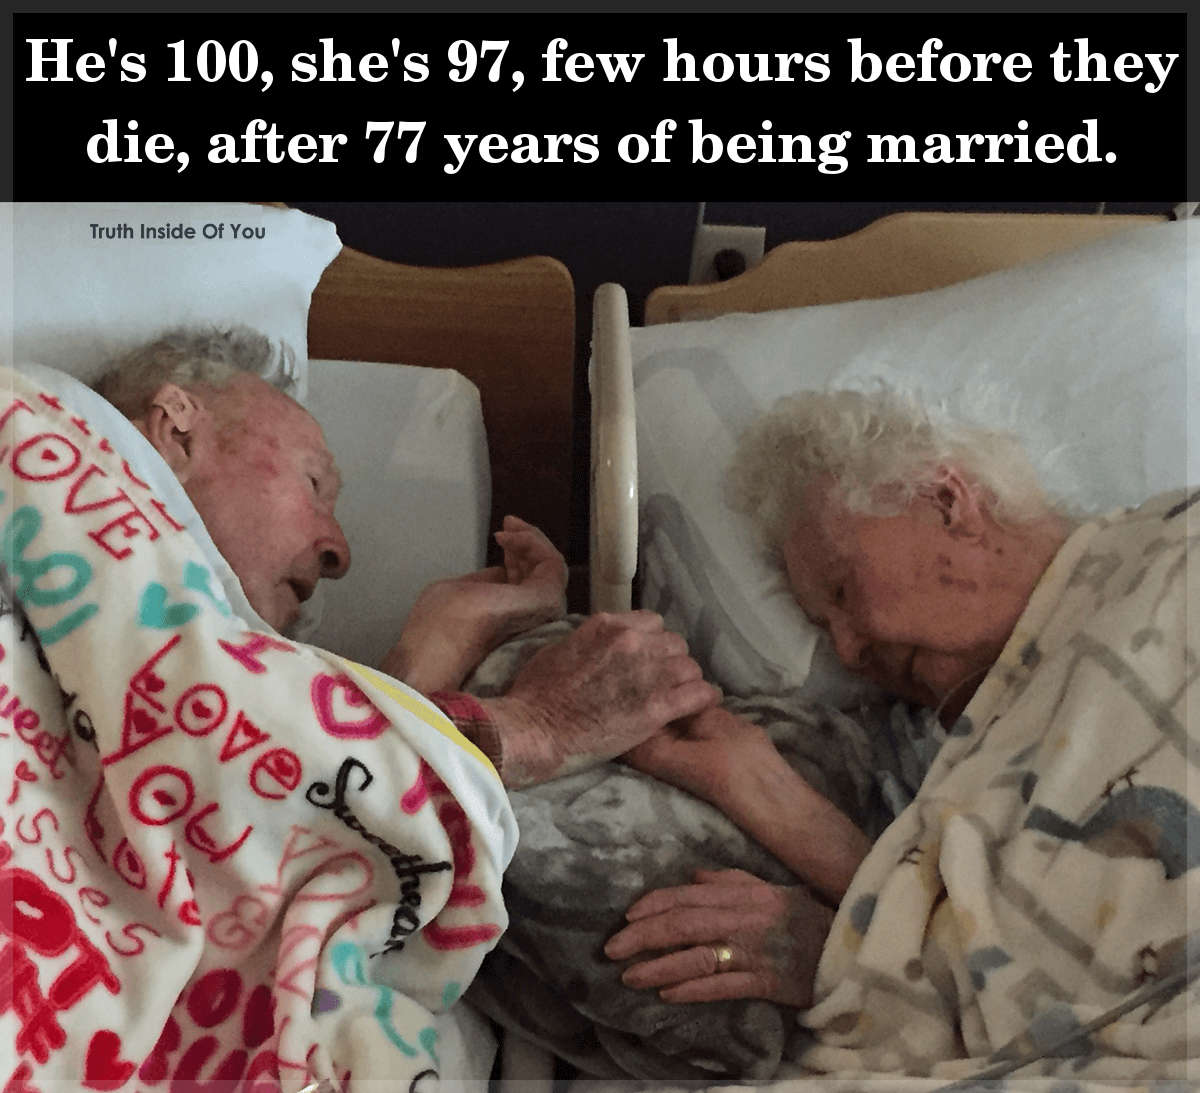 He's 100, she's 97, few hours before they die, after 77 years of being married.